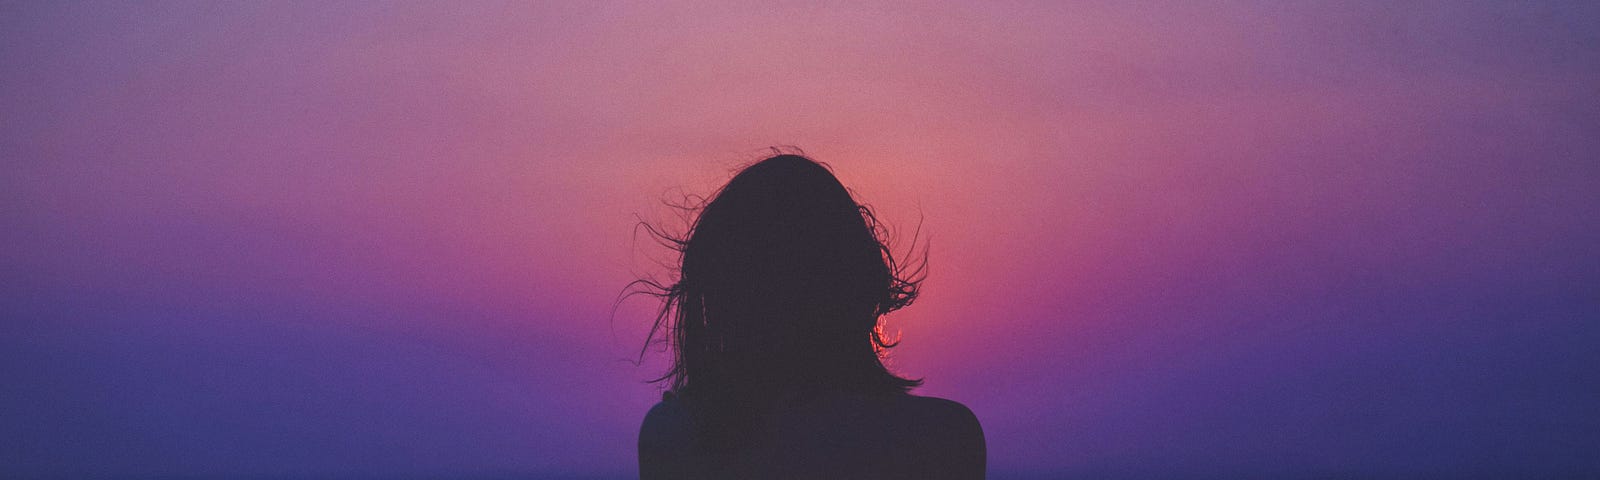 black silhouette showing woman looking out onto graduated red, blue, and purple sky